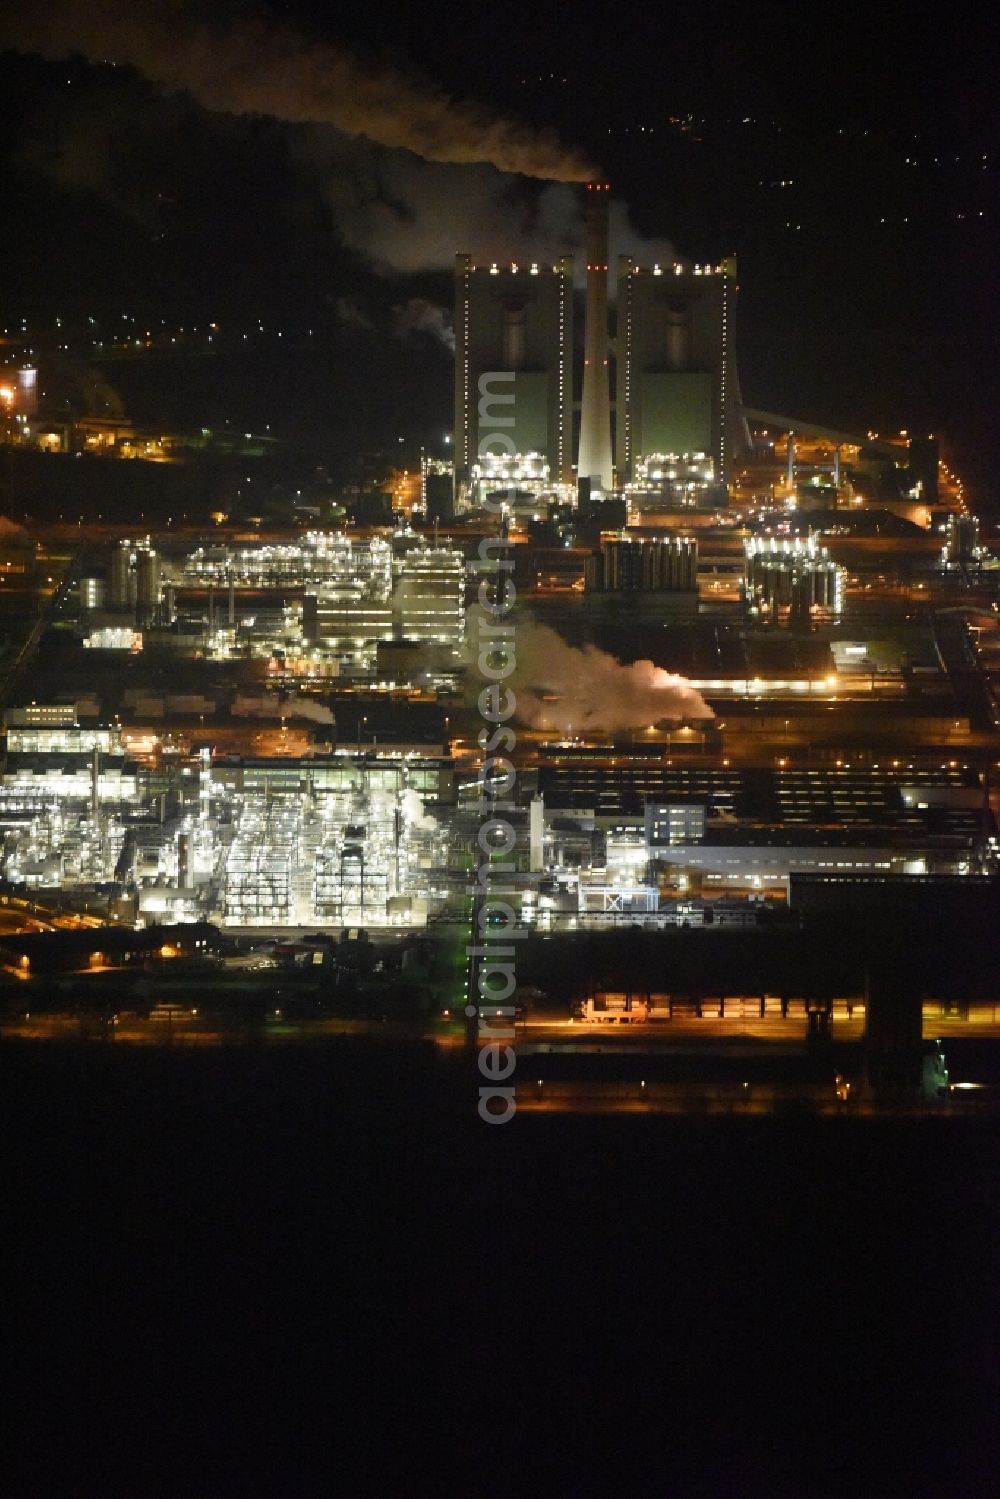 Schkopau at night from above - Night view of Refinery equipment and management systems on the factory premises of the chemical manufacturers Dow Olefinverbund GmbH in Schkopau in the state Saxony-Anhalt